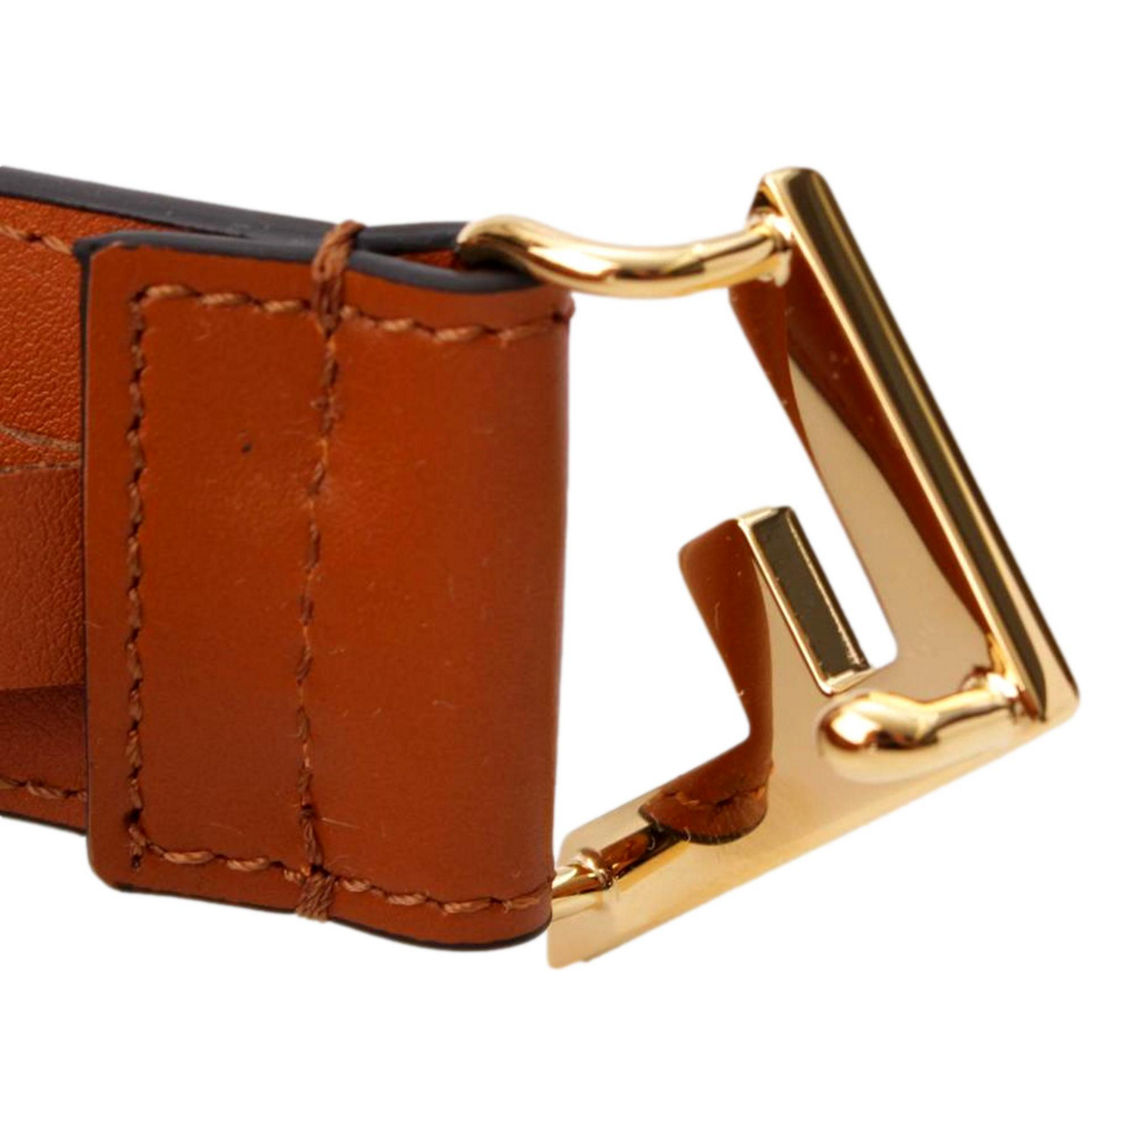 Fendi First Gold Logo Cuoio Brown Calf Leather Belt Size 90 (New) - Image 3 of 5